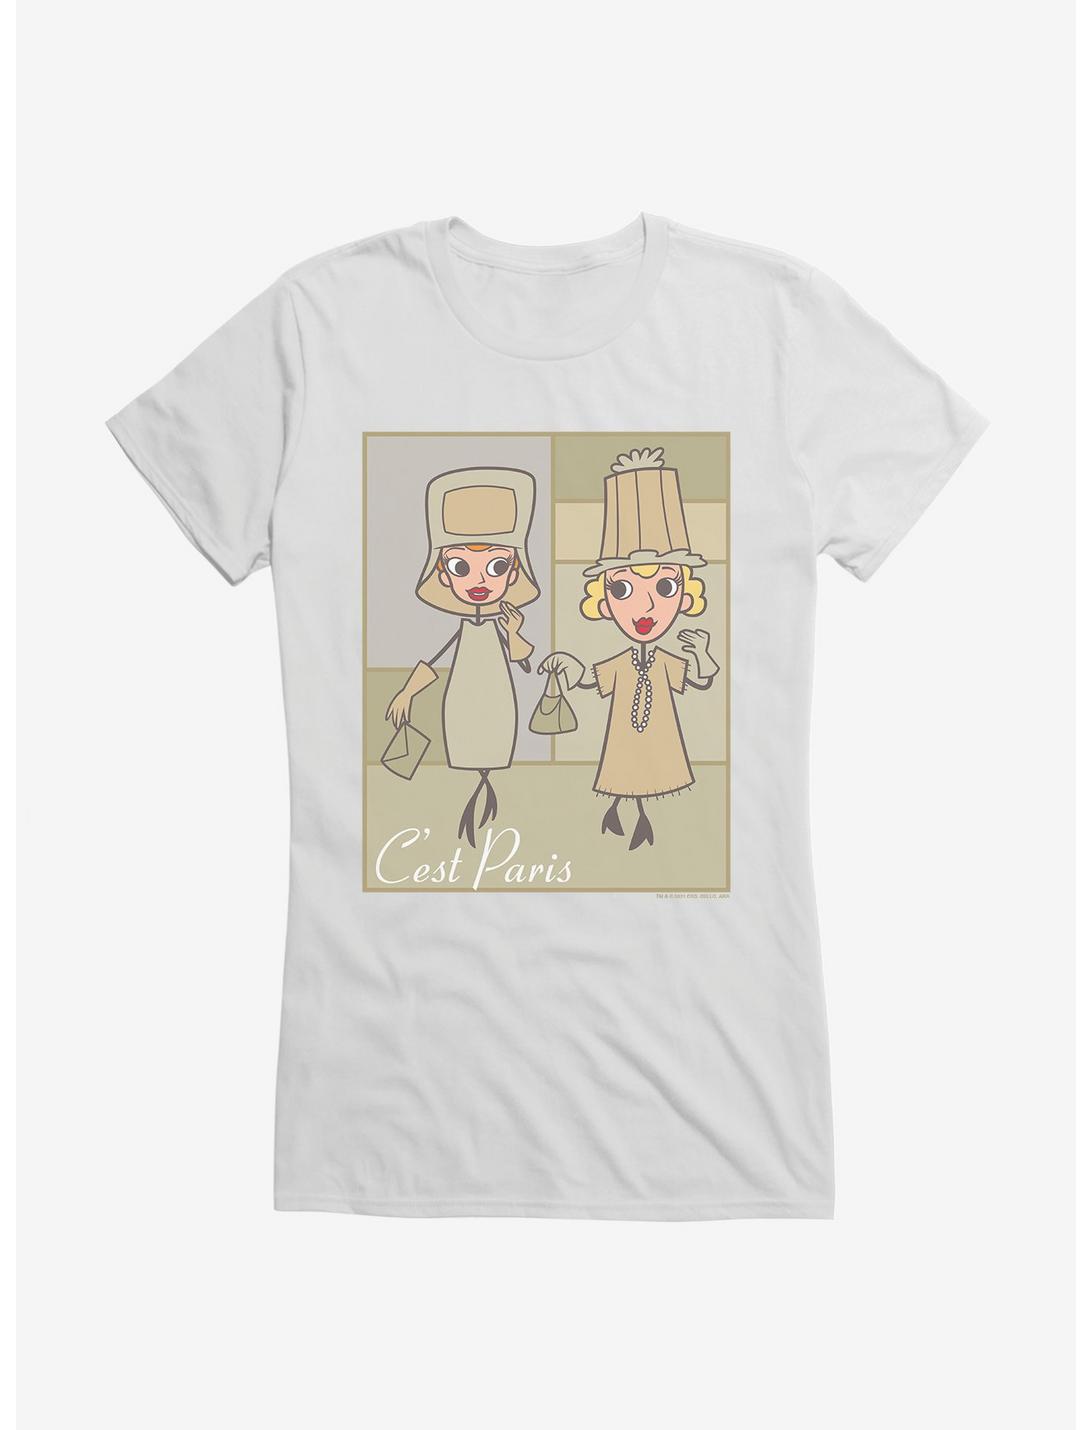 I Love Lucy Ethel And Lucy Paris In Color Girls T-Shirt, , hi-res